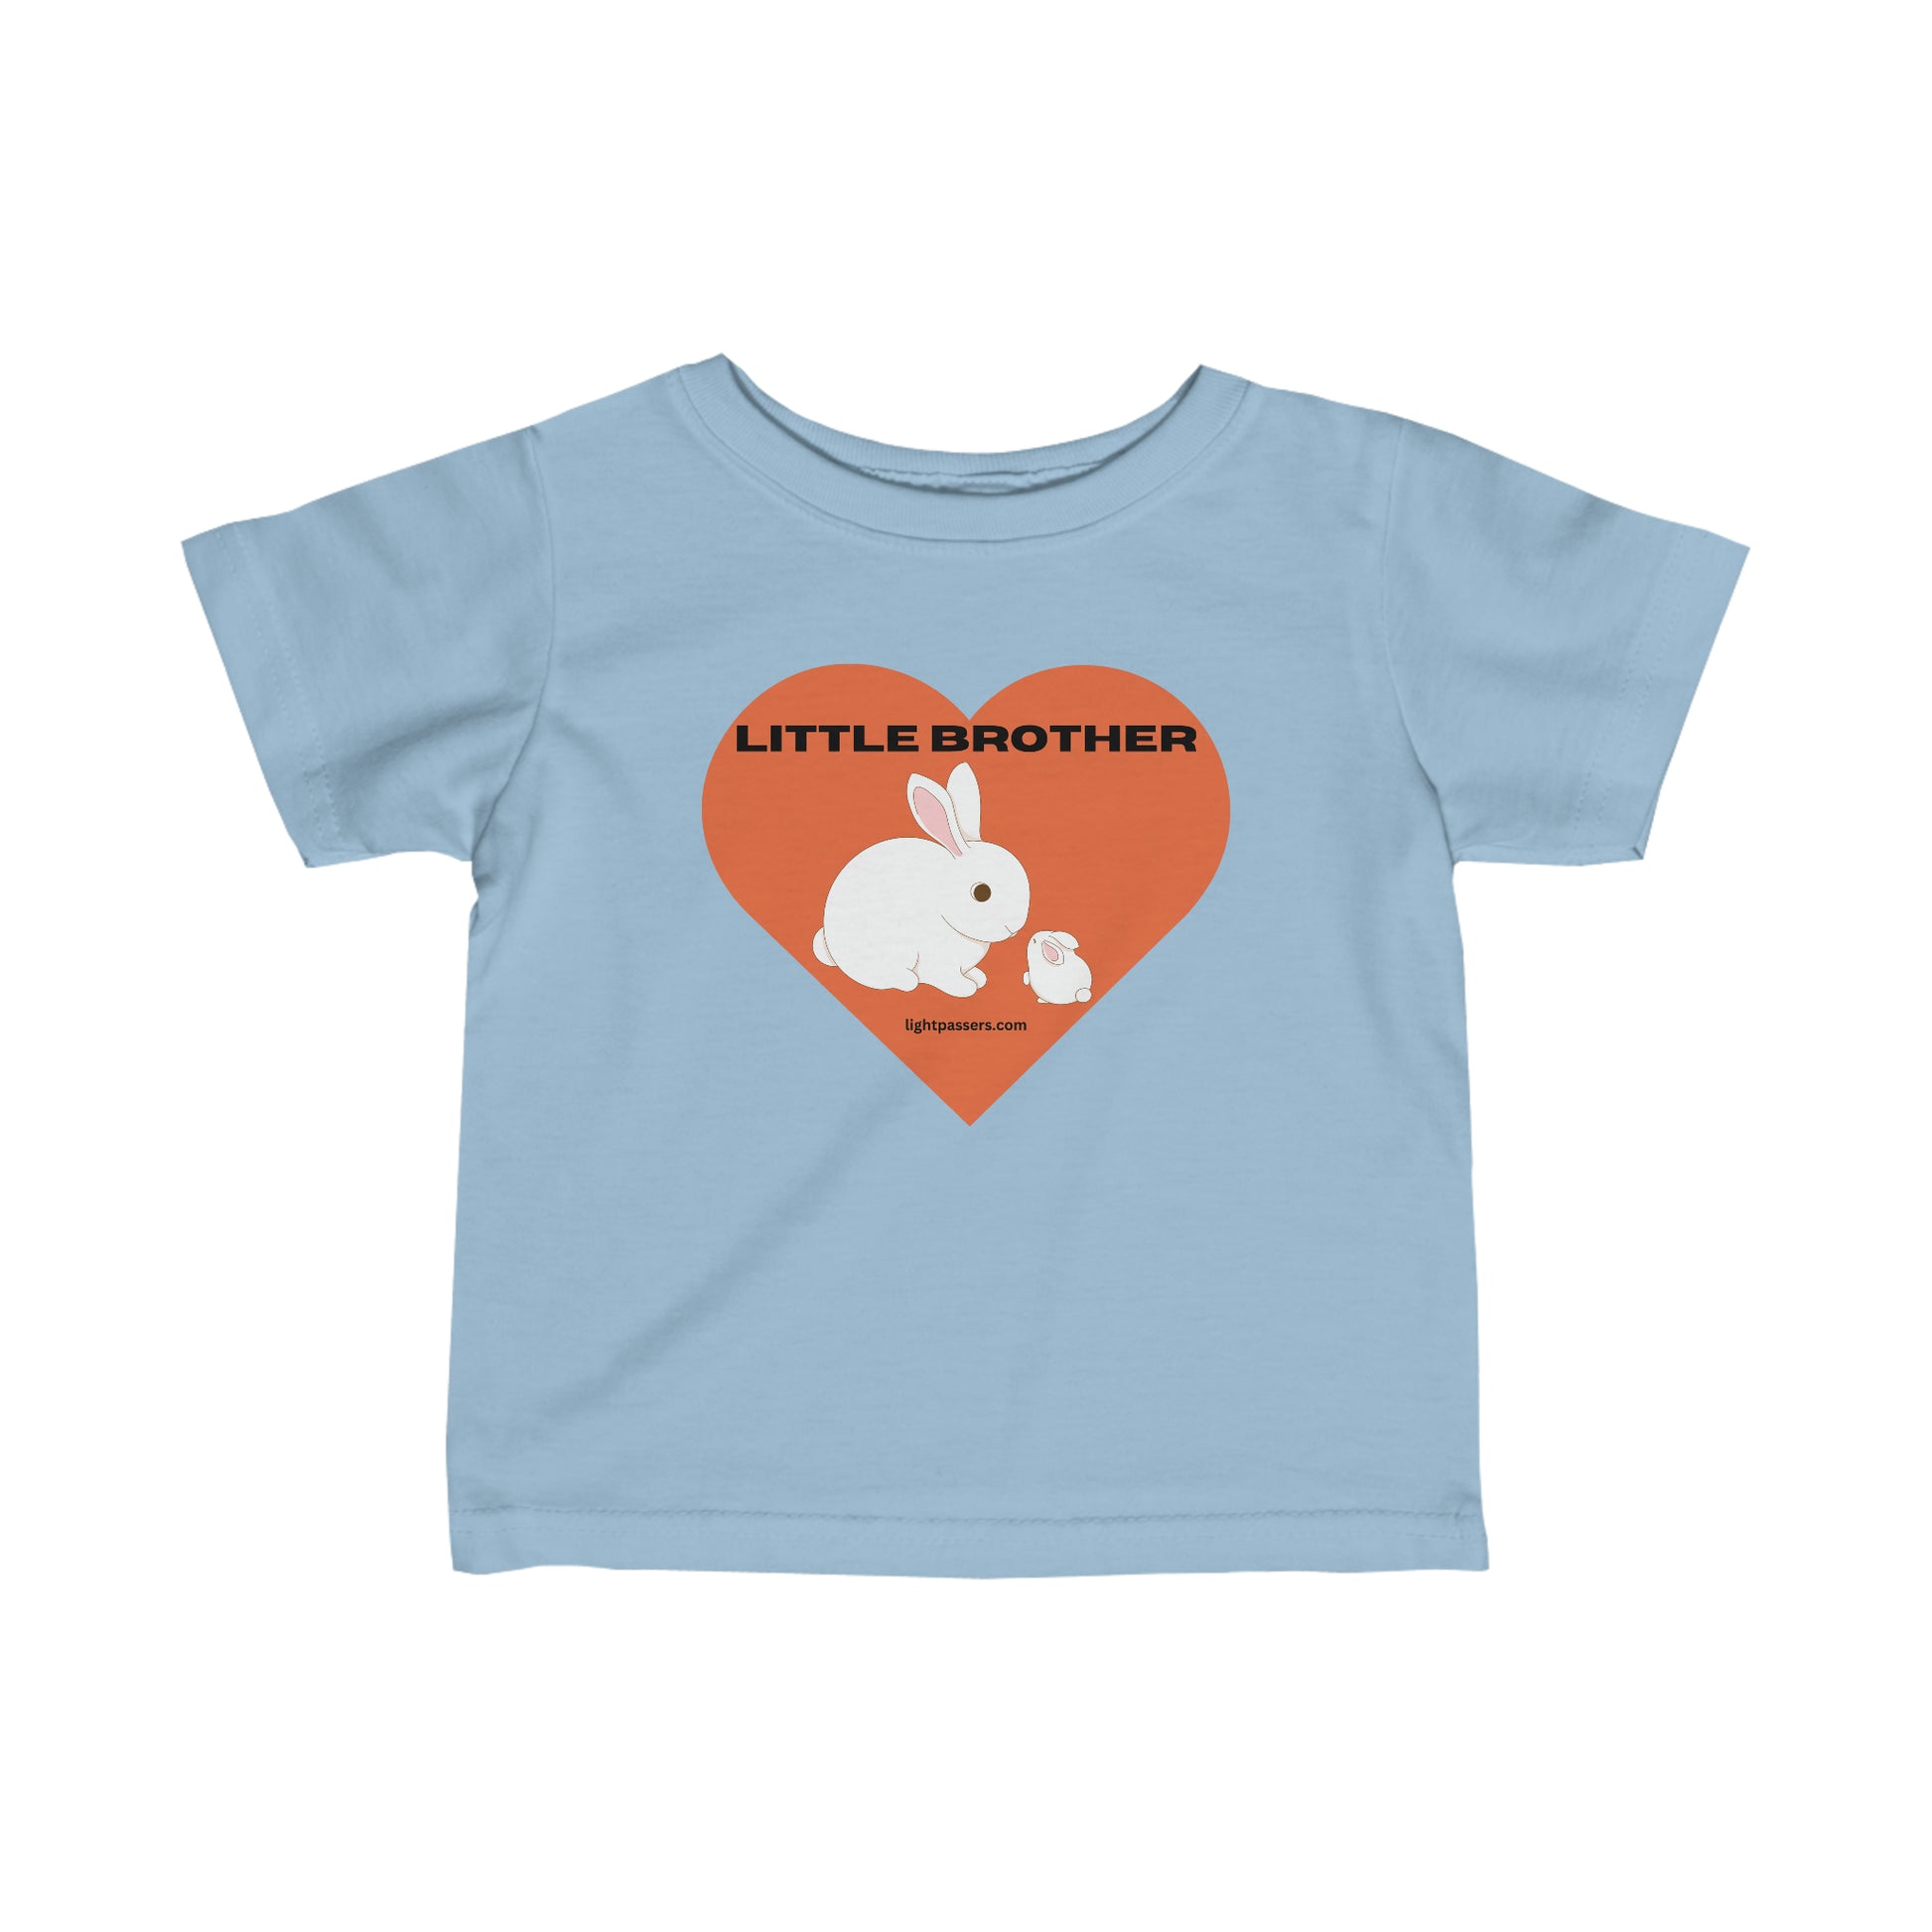 Infant fine jersey tee with a rabbit and heart design, perfect for little siblings. Side seams, ribbed knitting, and taped shoulders for durability and comfort. 100% Combed ringspun cotton. Classic fit.